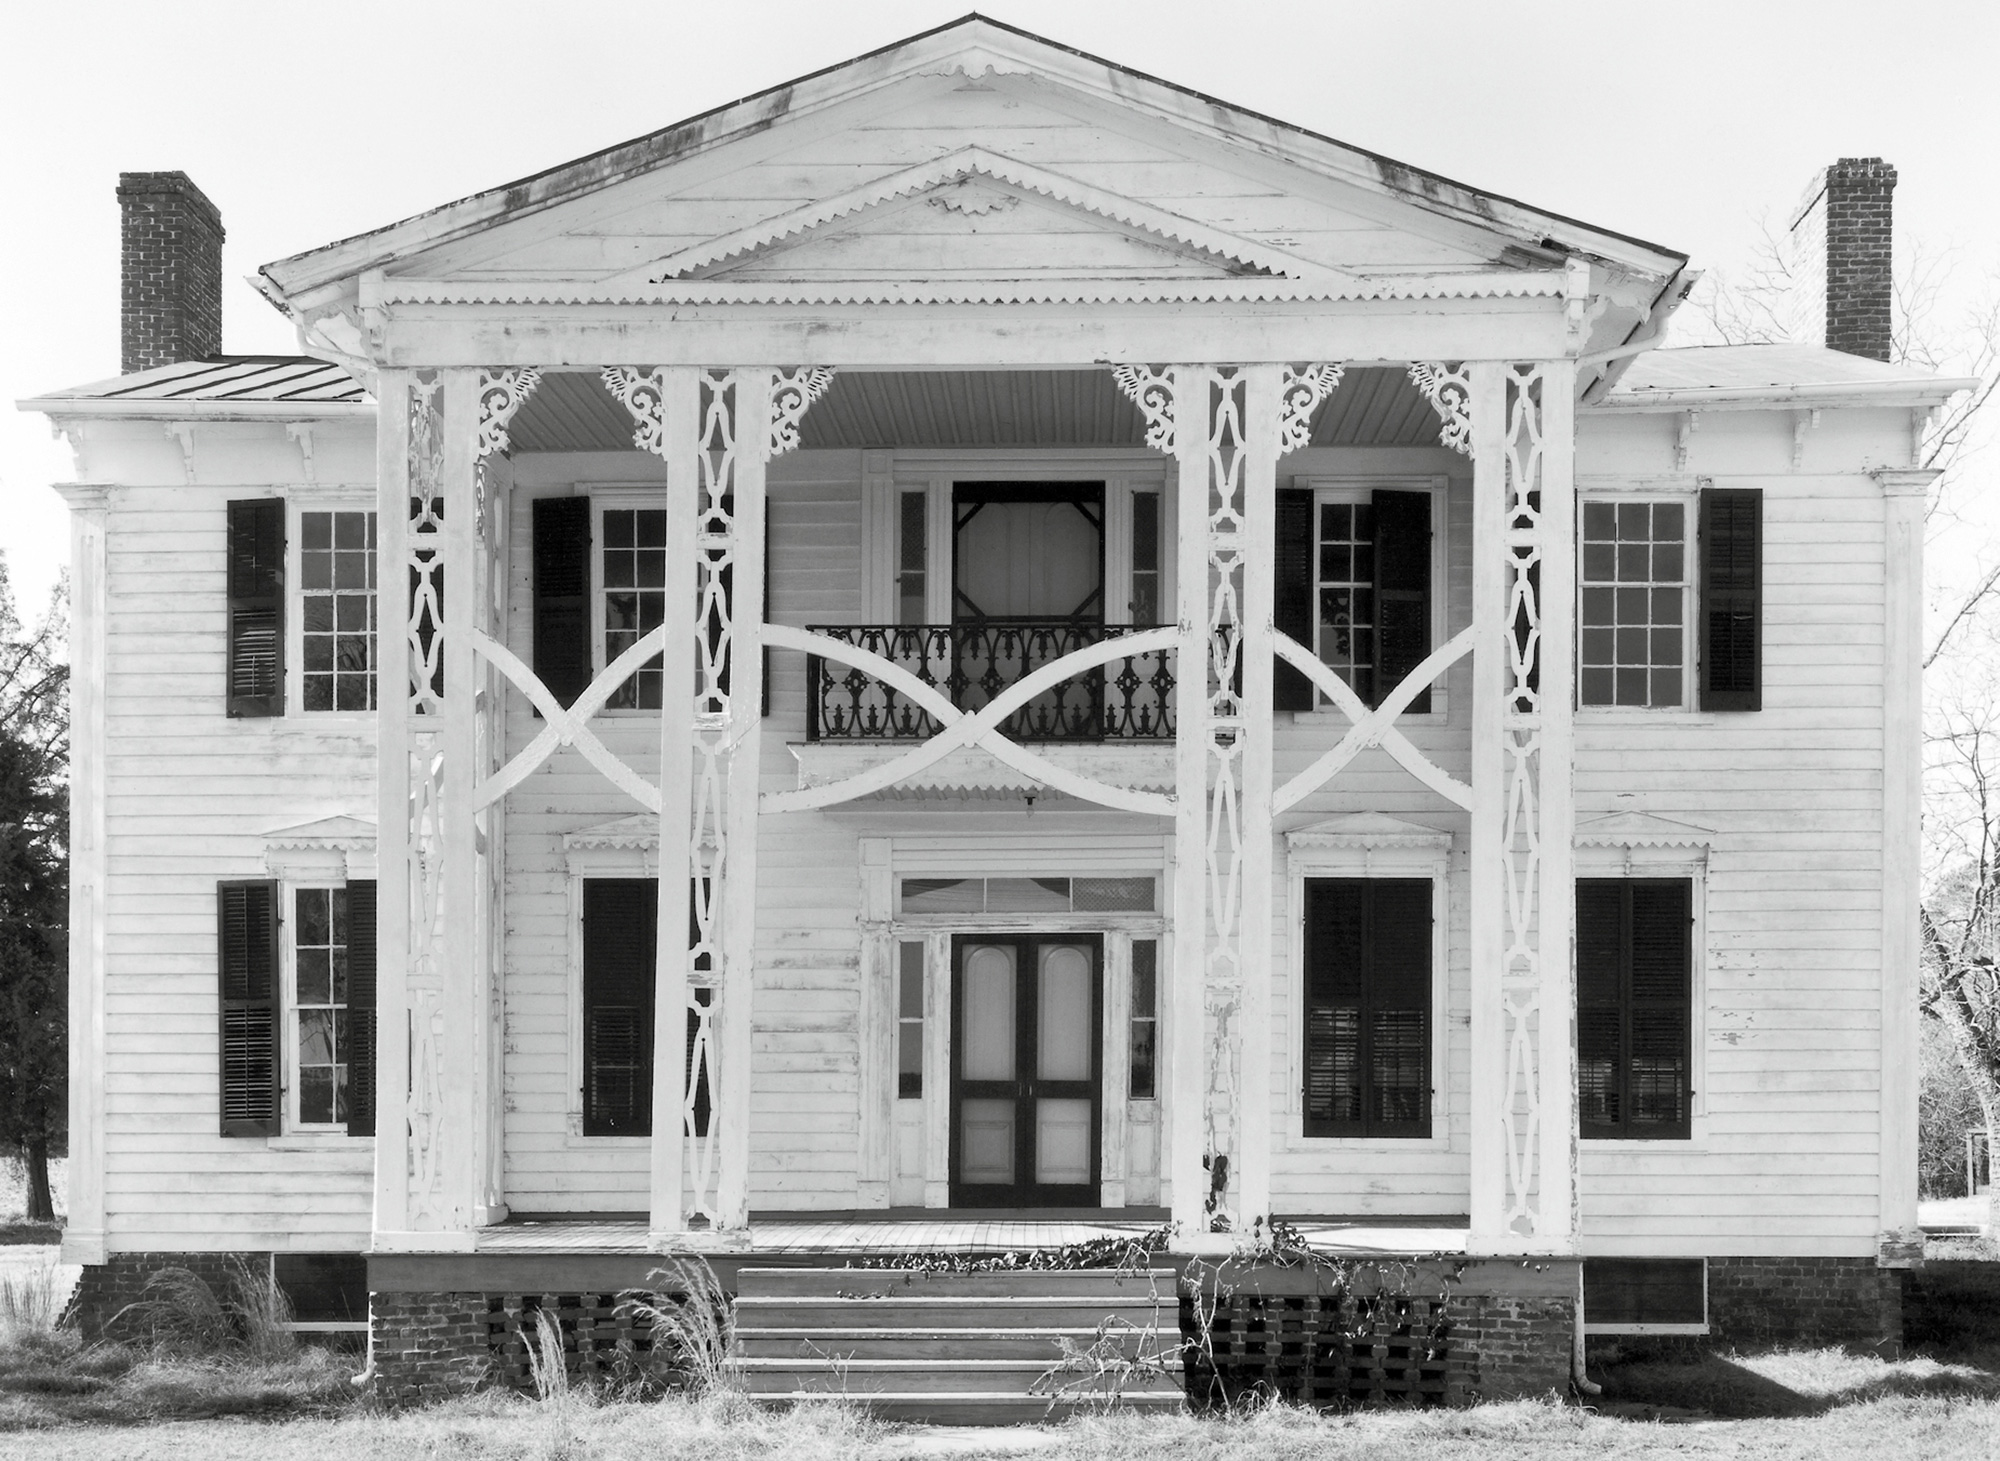 Max Belcher, House, ca. 1820, Northampton County, North Carolina, 1986. All photos courtesy Canadian Centre for Architecture.